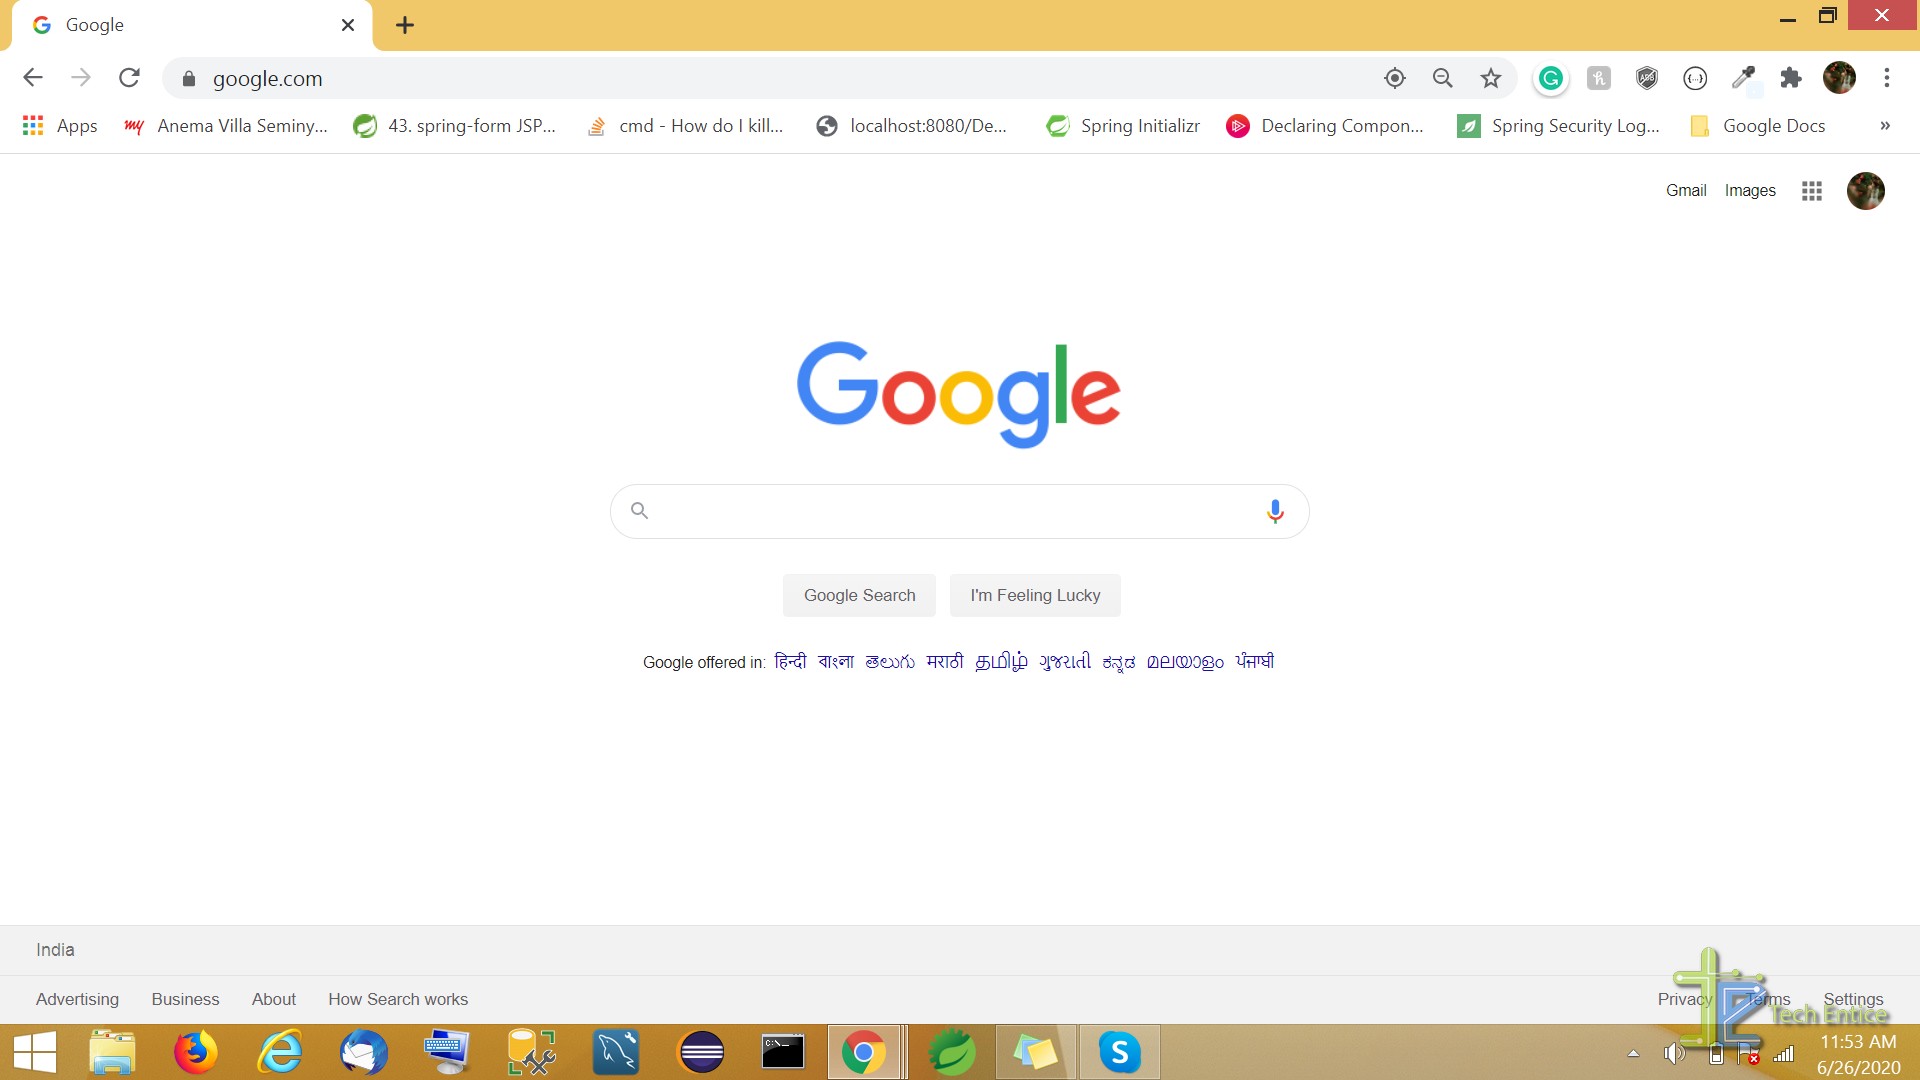 How To Change The Background Image Of Your Chrome Browser?